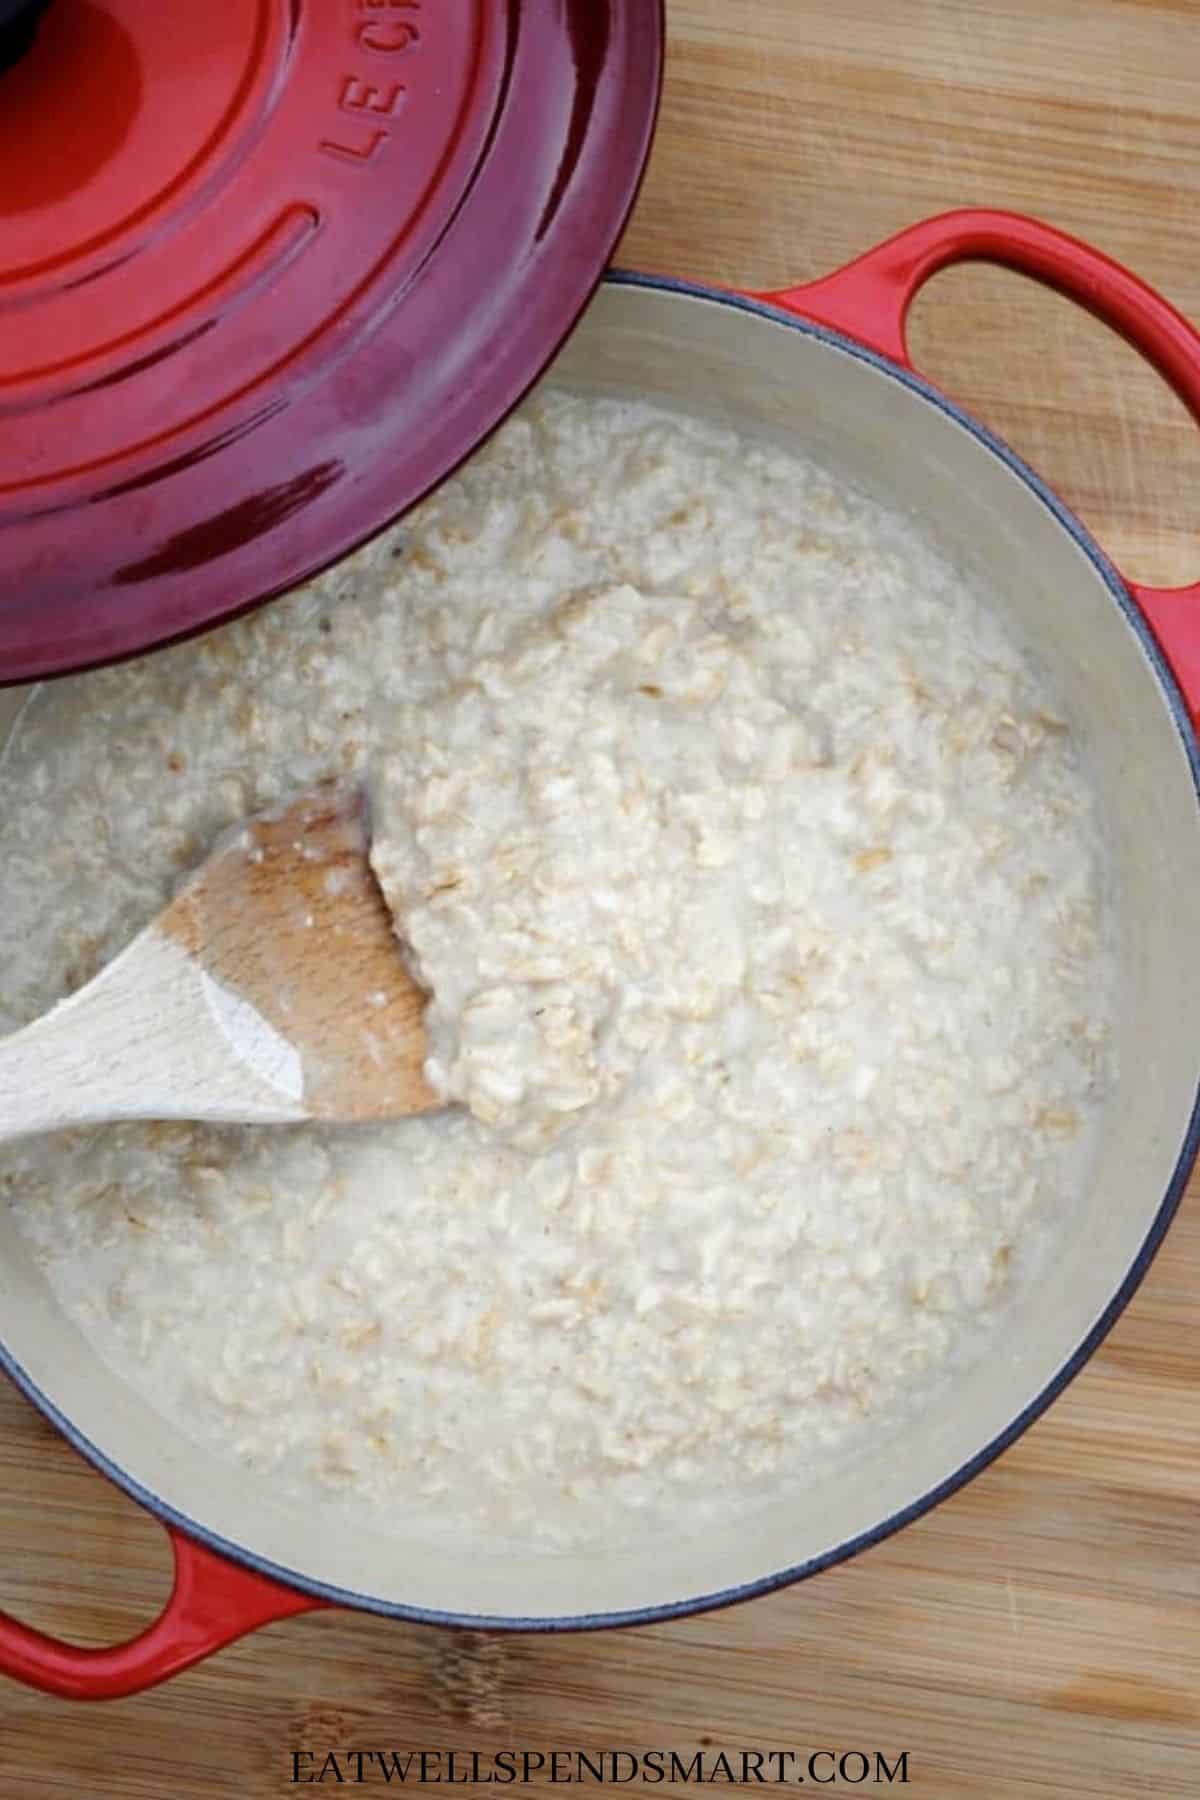 Wooden spoon scooping oatmeal from a red pot.